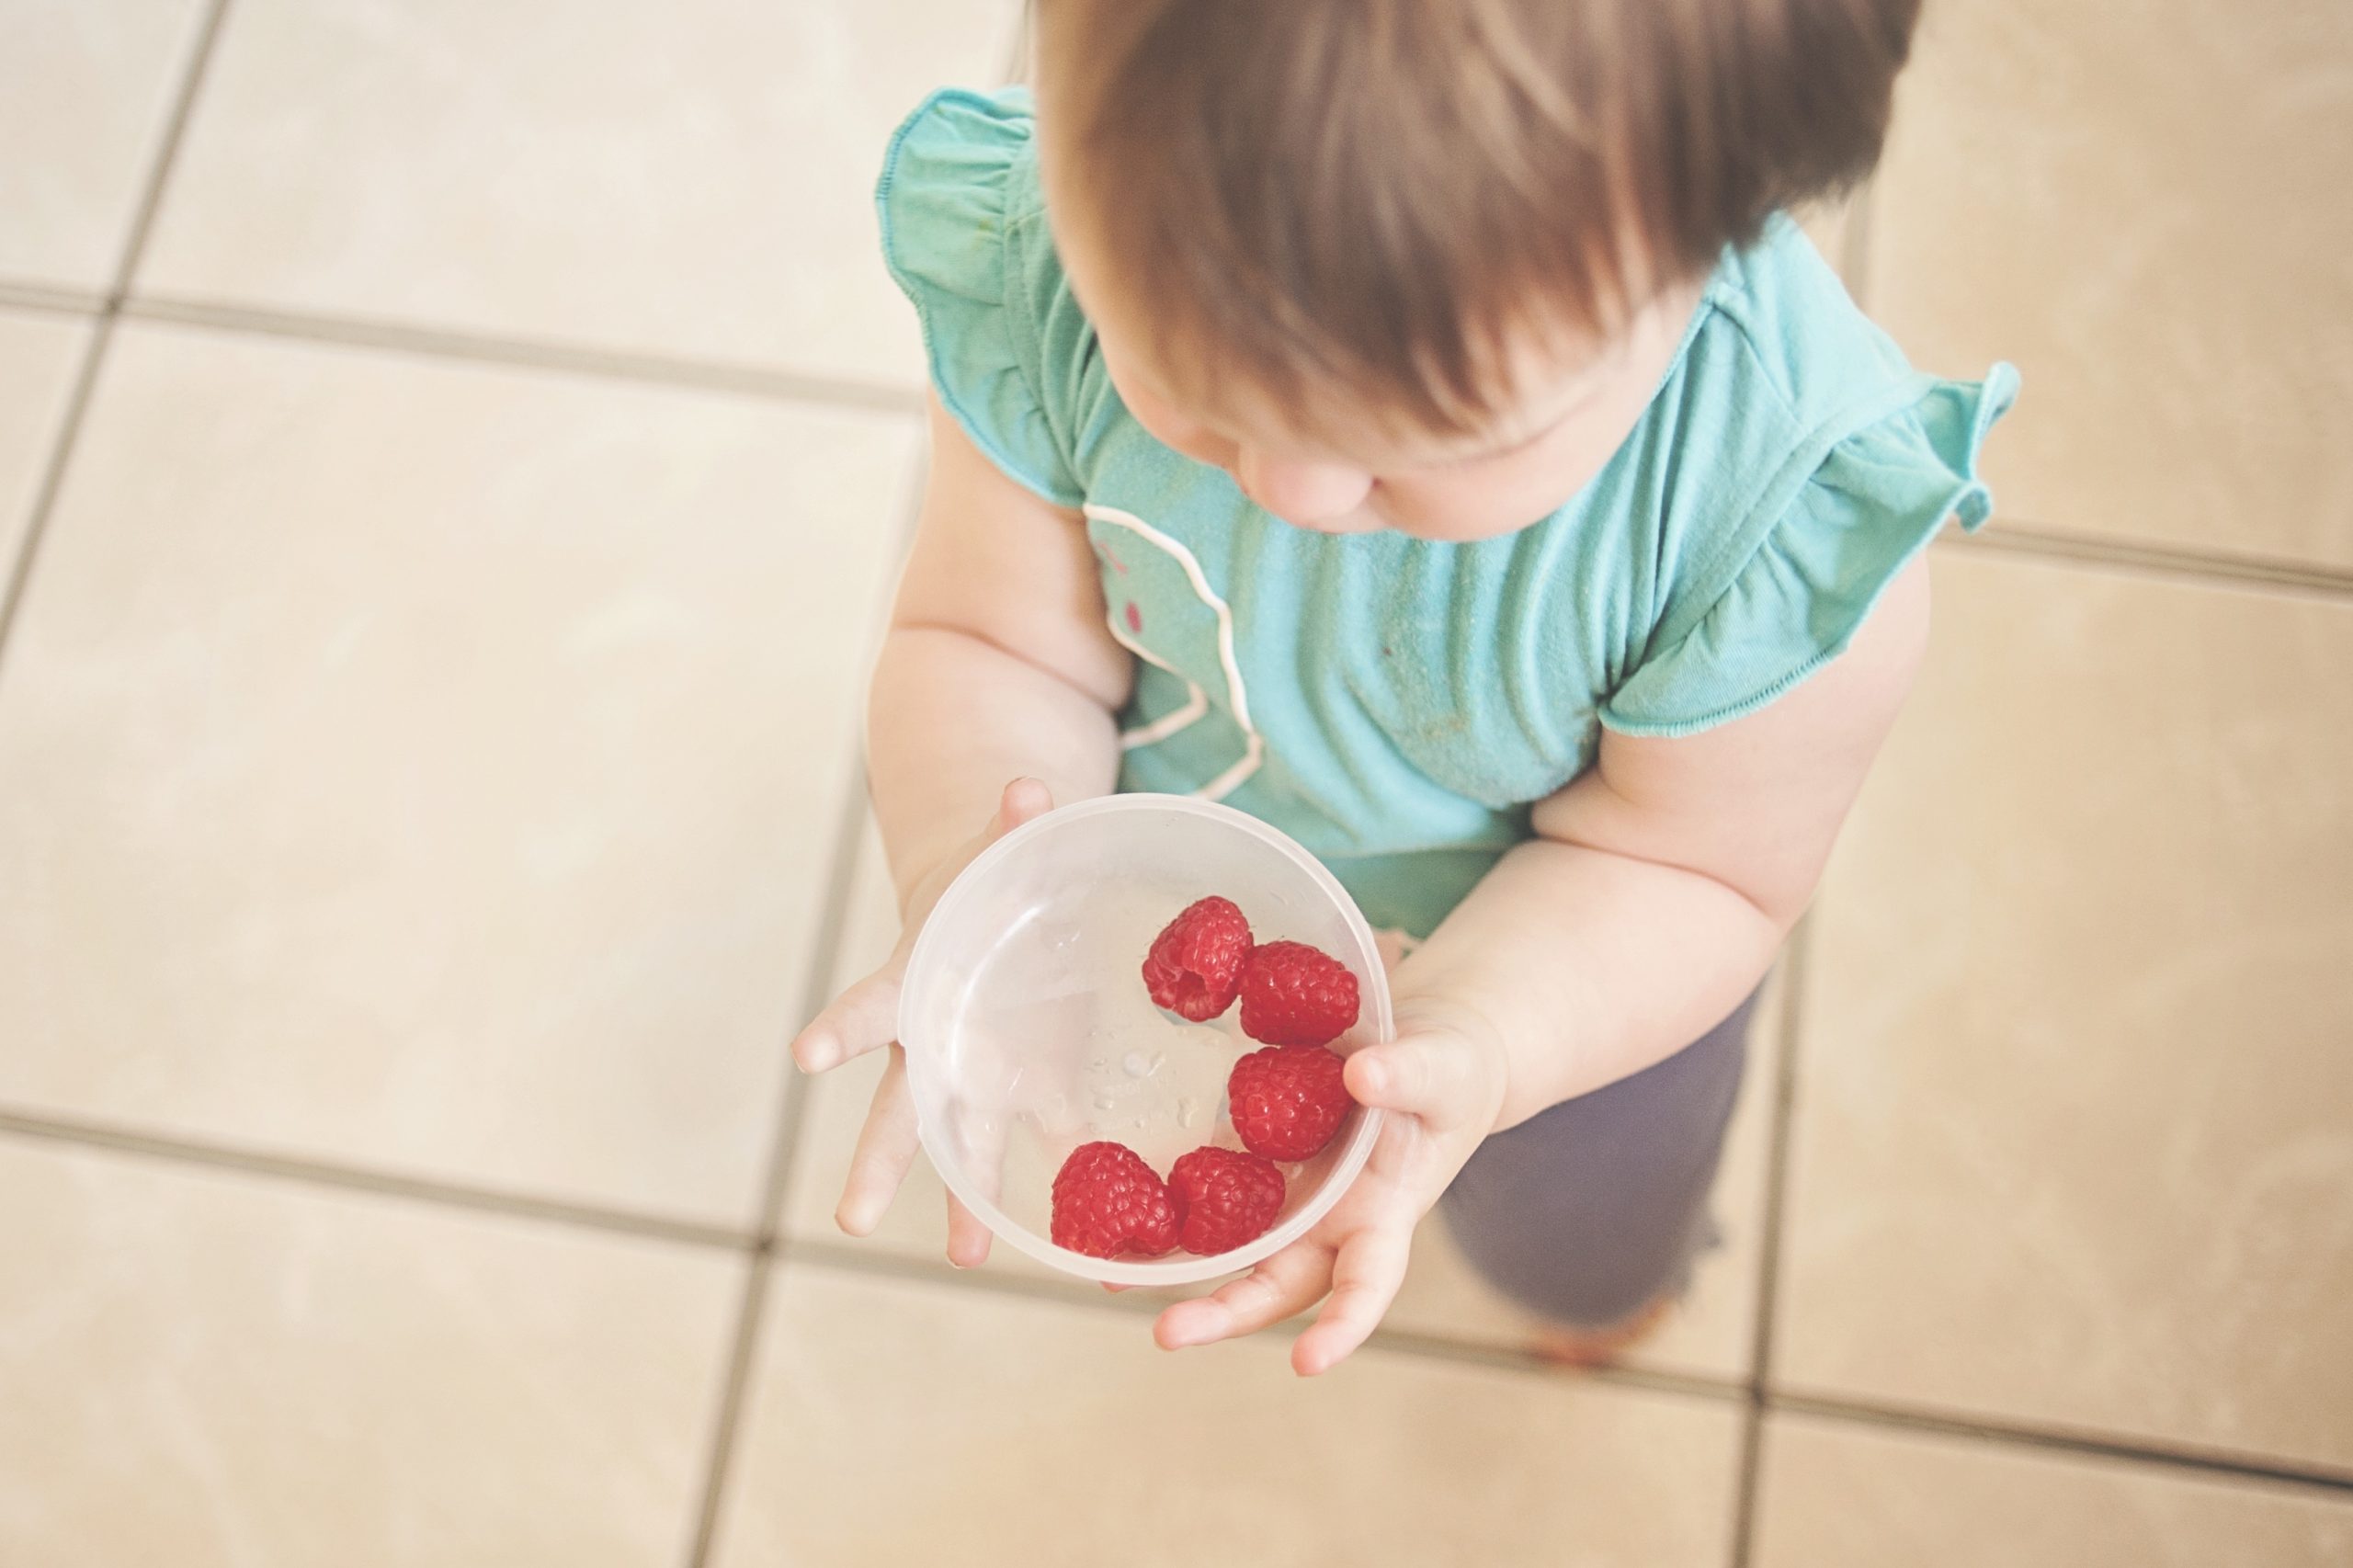 8 Healthy Eating Tips For When Your Kid’s A Picky Eater